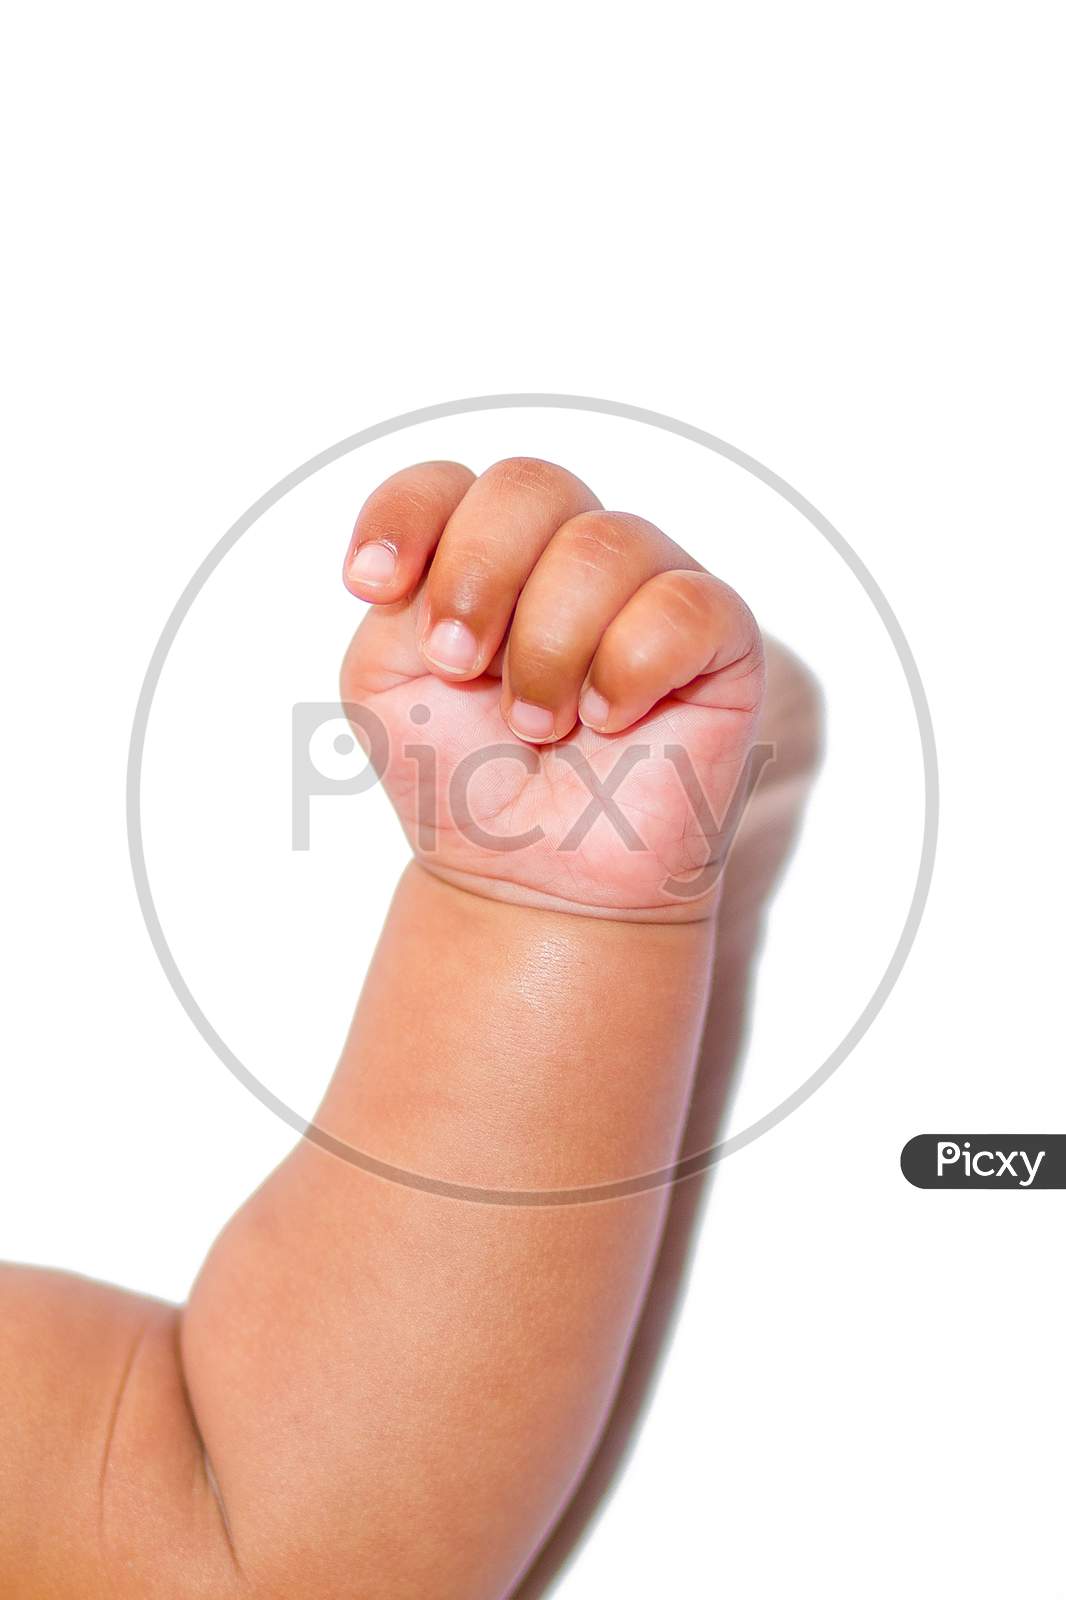 A Asian Baby Hand Holding Mother Finger